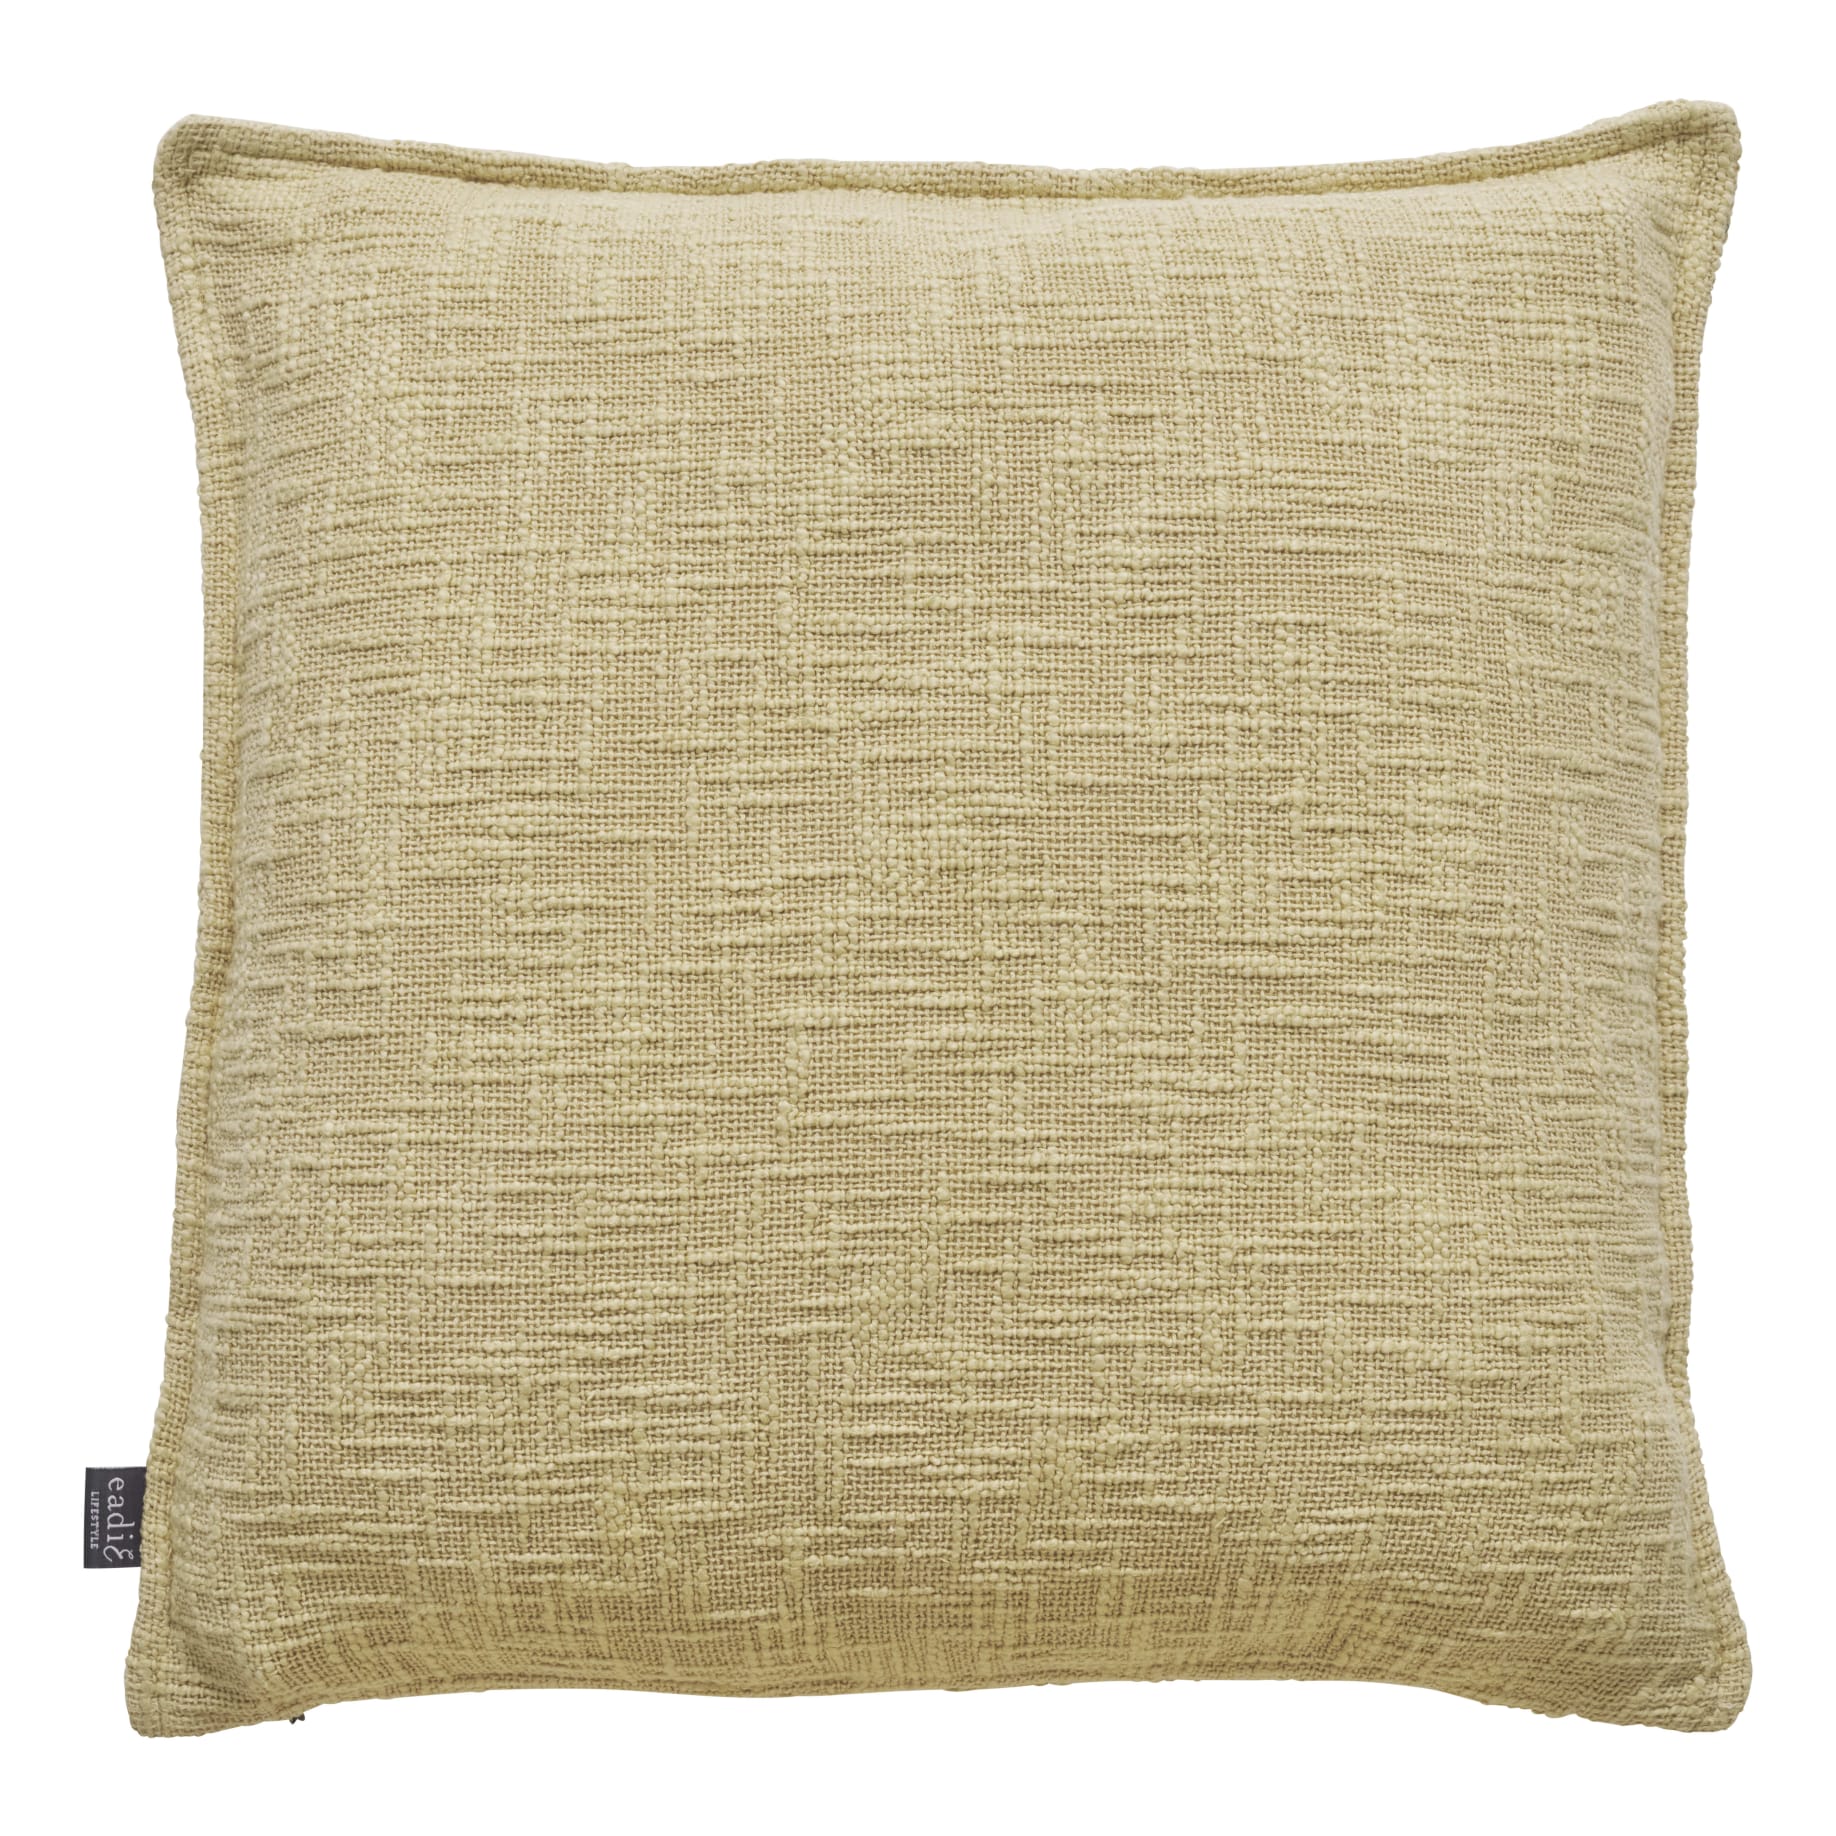 Adler Feather Fill Cushion 50x50cm in Butter